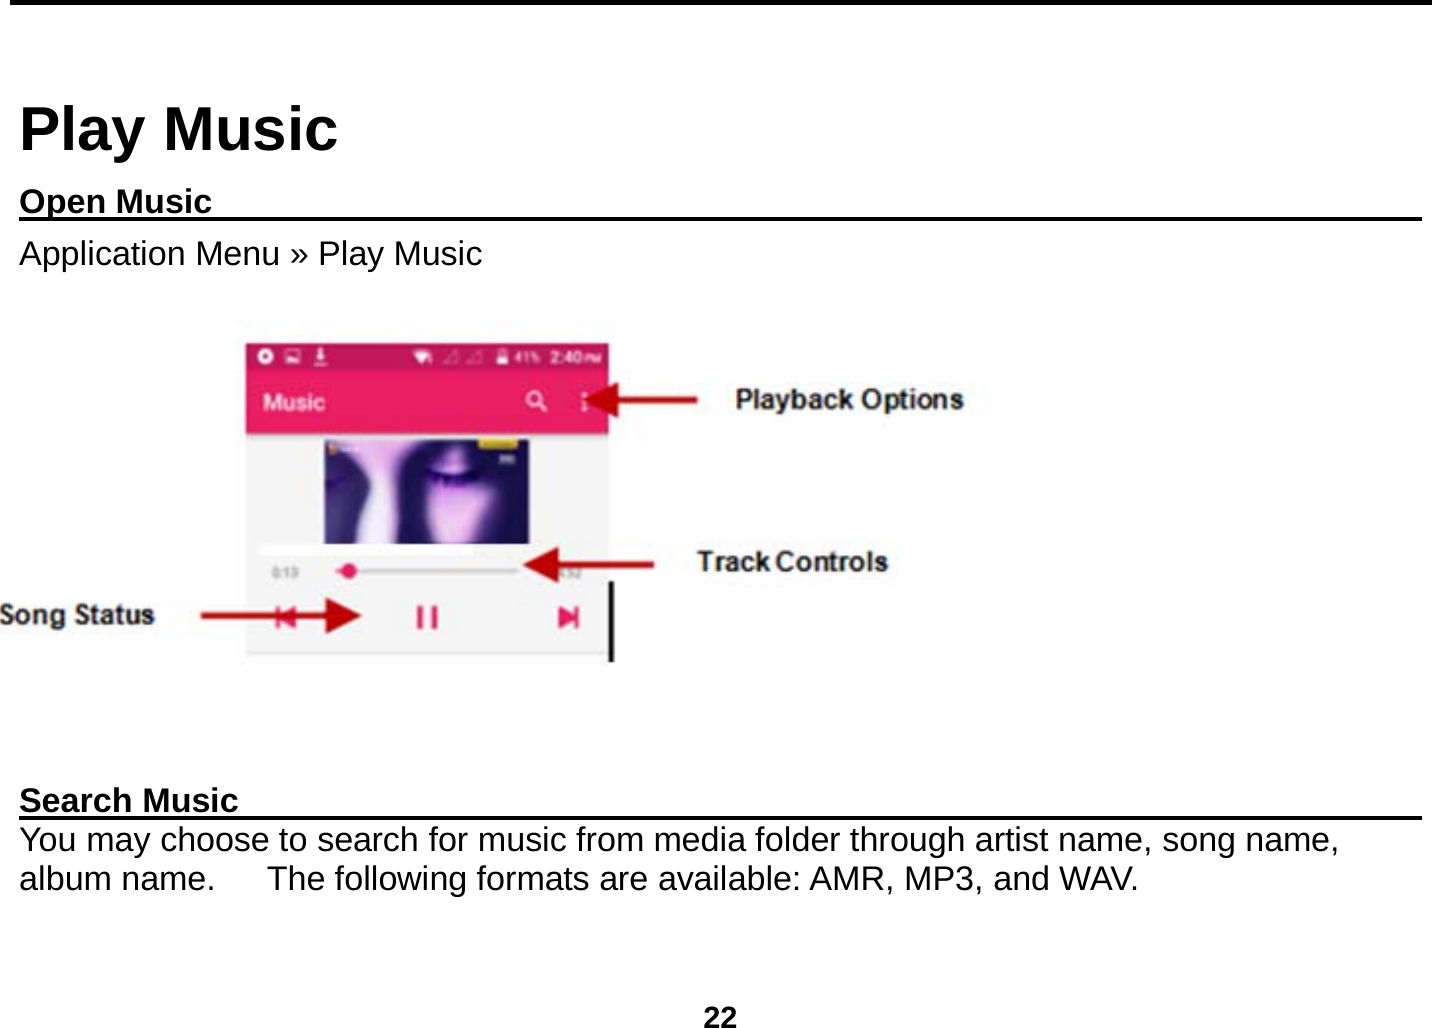  22  Play Music Open Music                                                                                  Application Menu » Play Music          Search Music                                                                                You may choose to search for music from media folder through artist name, song name, album name.      The following formats are available: AMR, MP3, and WAV.  